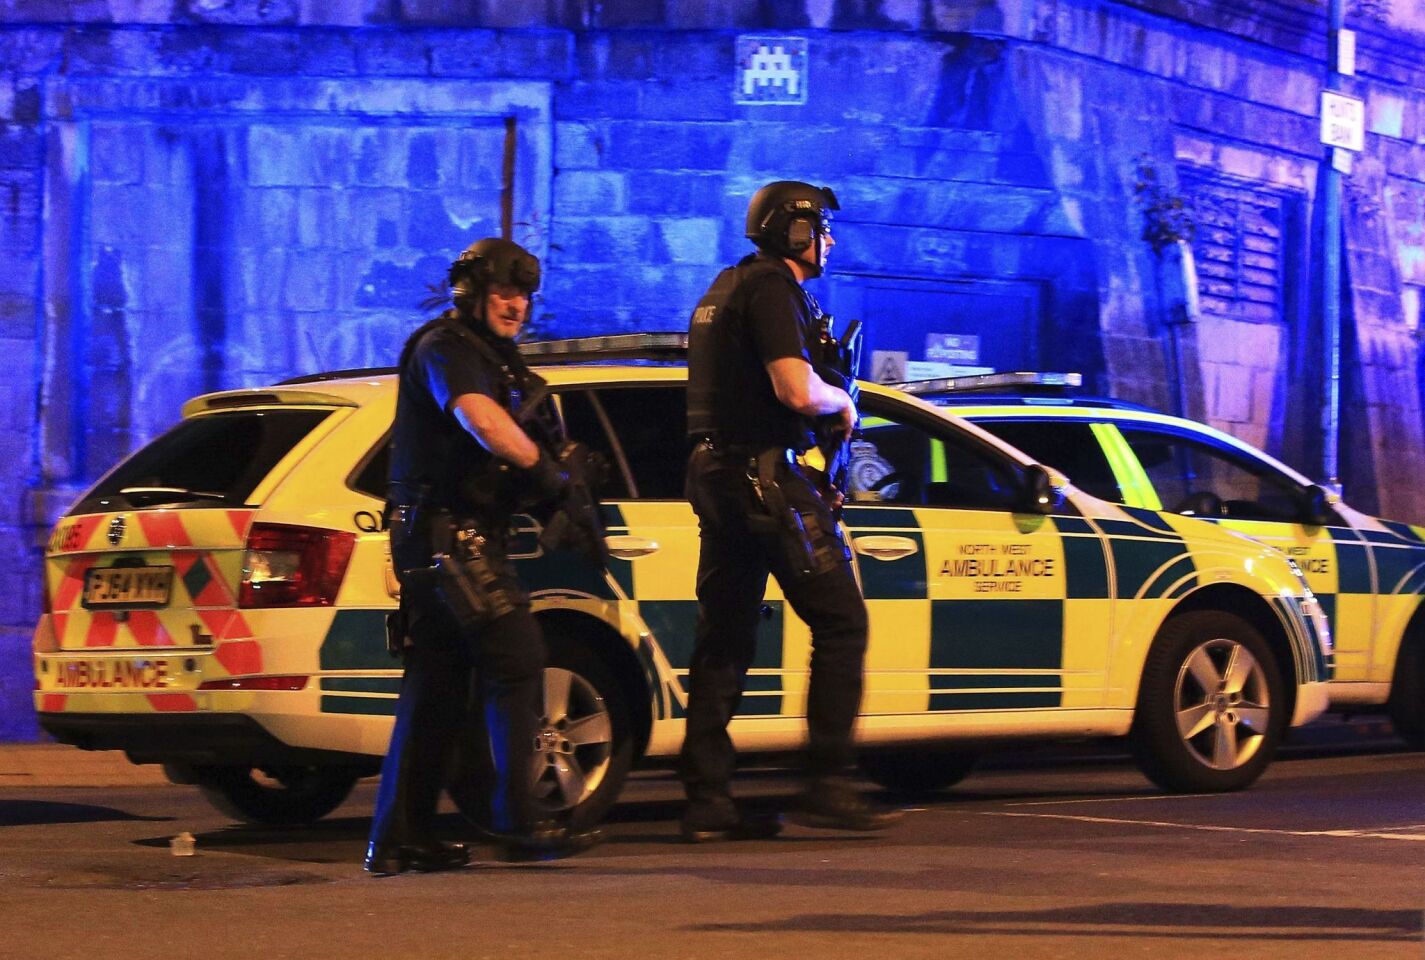 Armed police at Manchester Arena after reports of an explosion at the venue during an Ariana Grande concert Monday night.